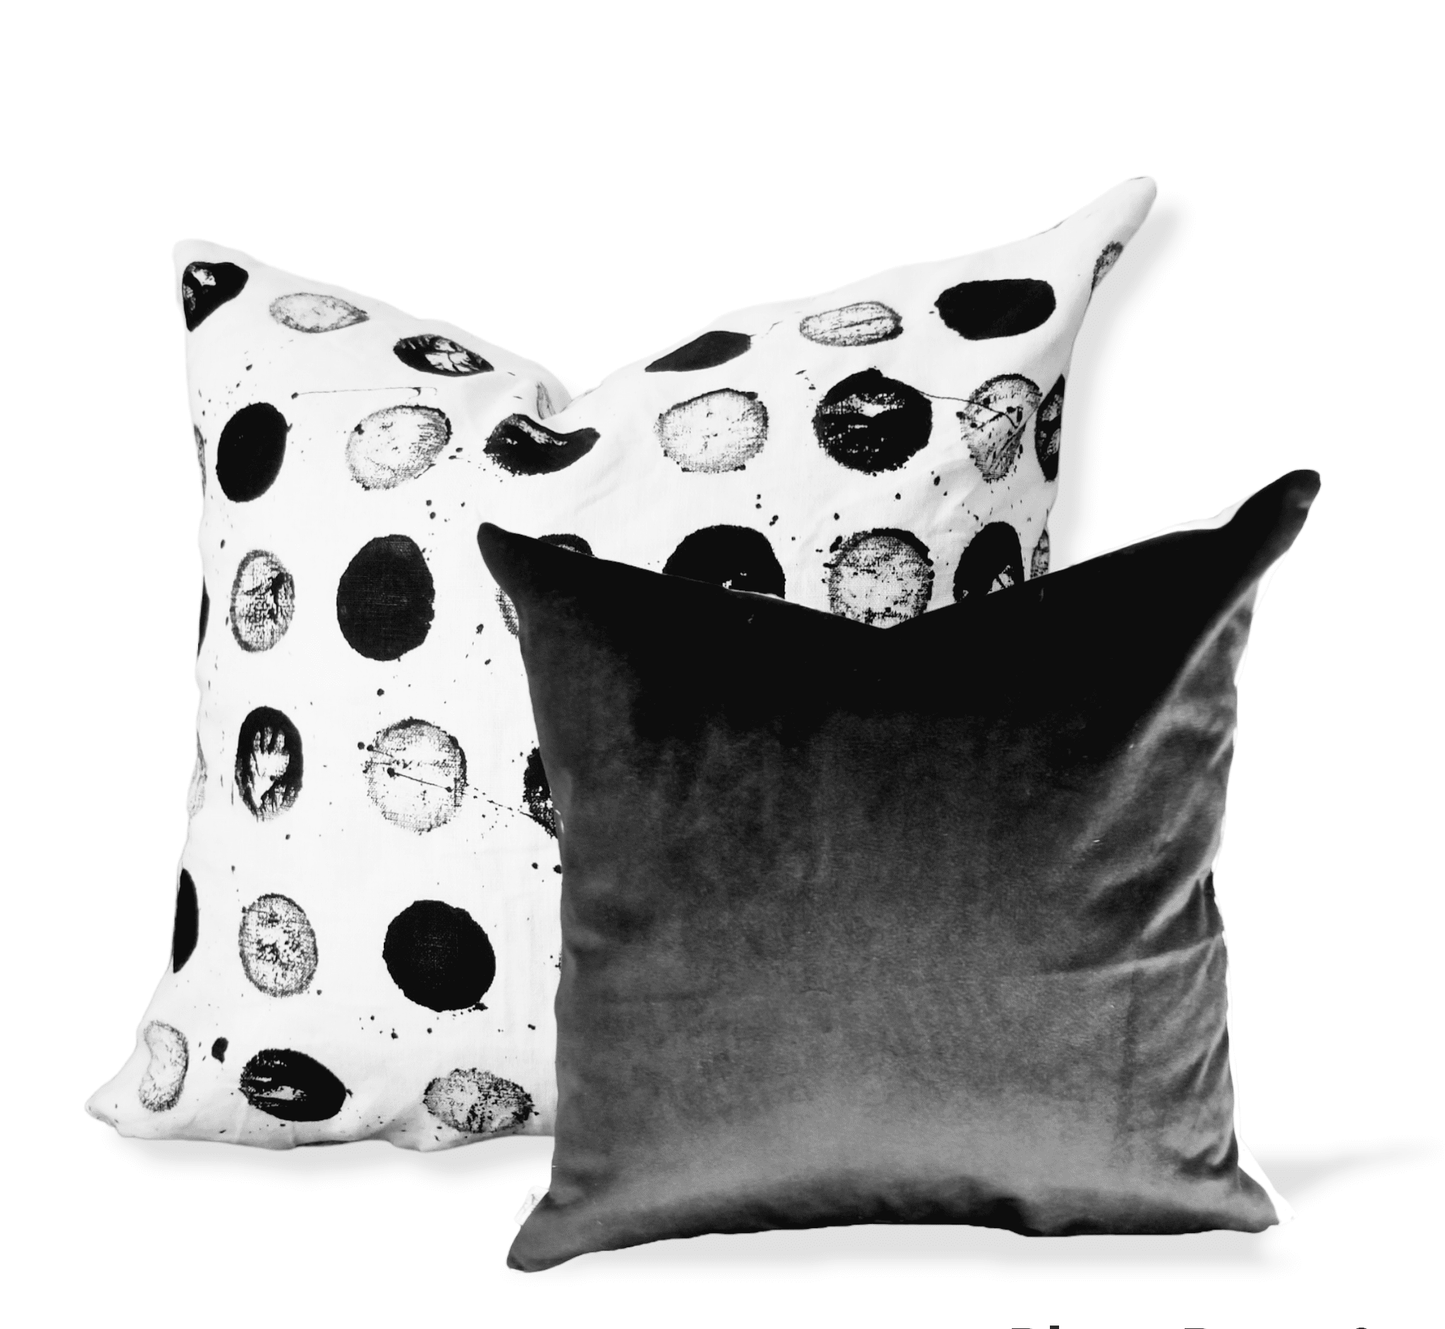 Pair of black and white designer throw pillows from advenique home decor.  Shop luxury decorative pillows and cushions for your bedroom, living room or any room.  Get great deals on high end accent pillows and cushions.